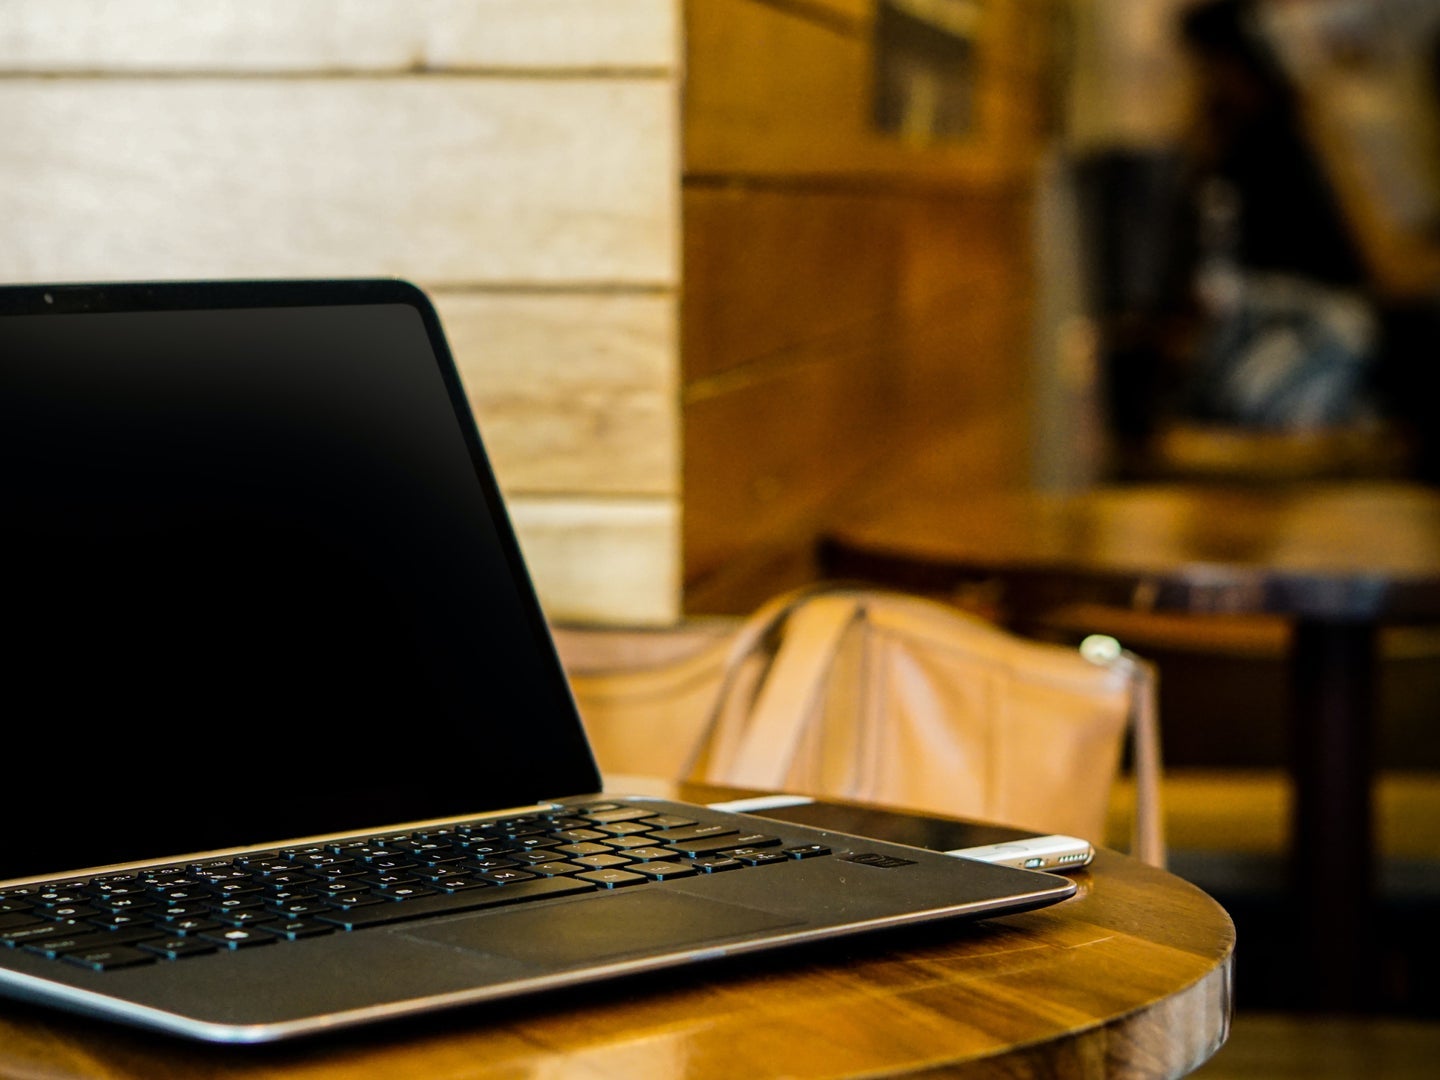 An unattended laptop at a coffee shop.